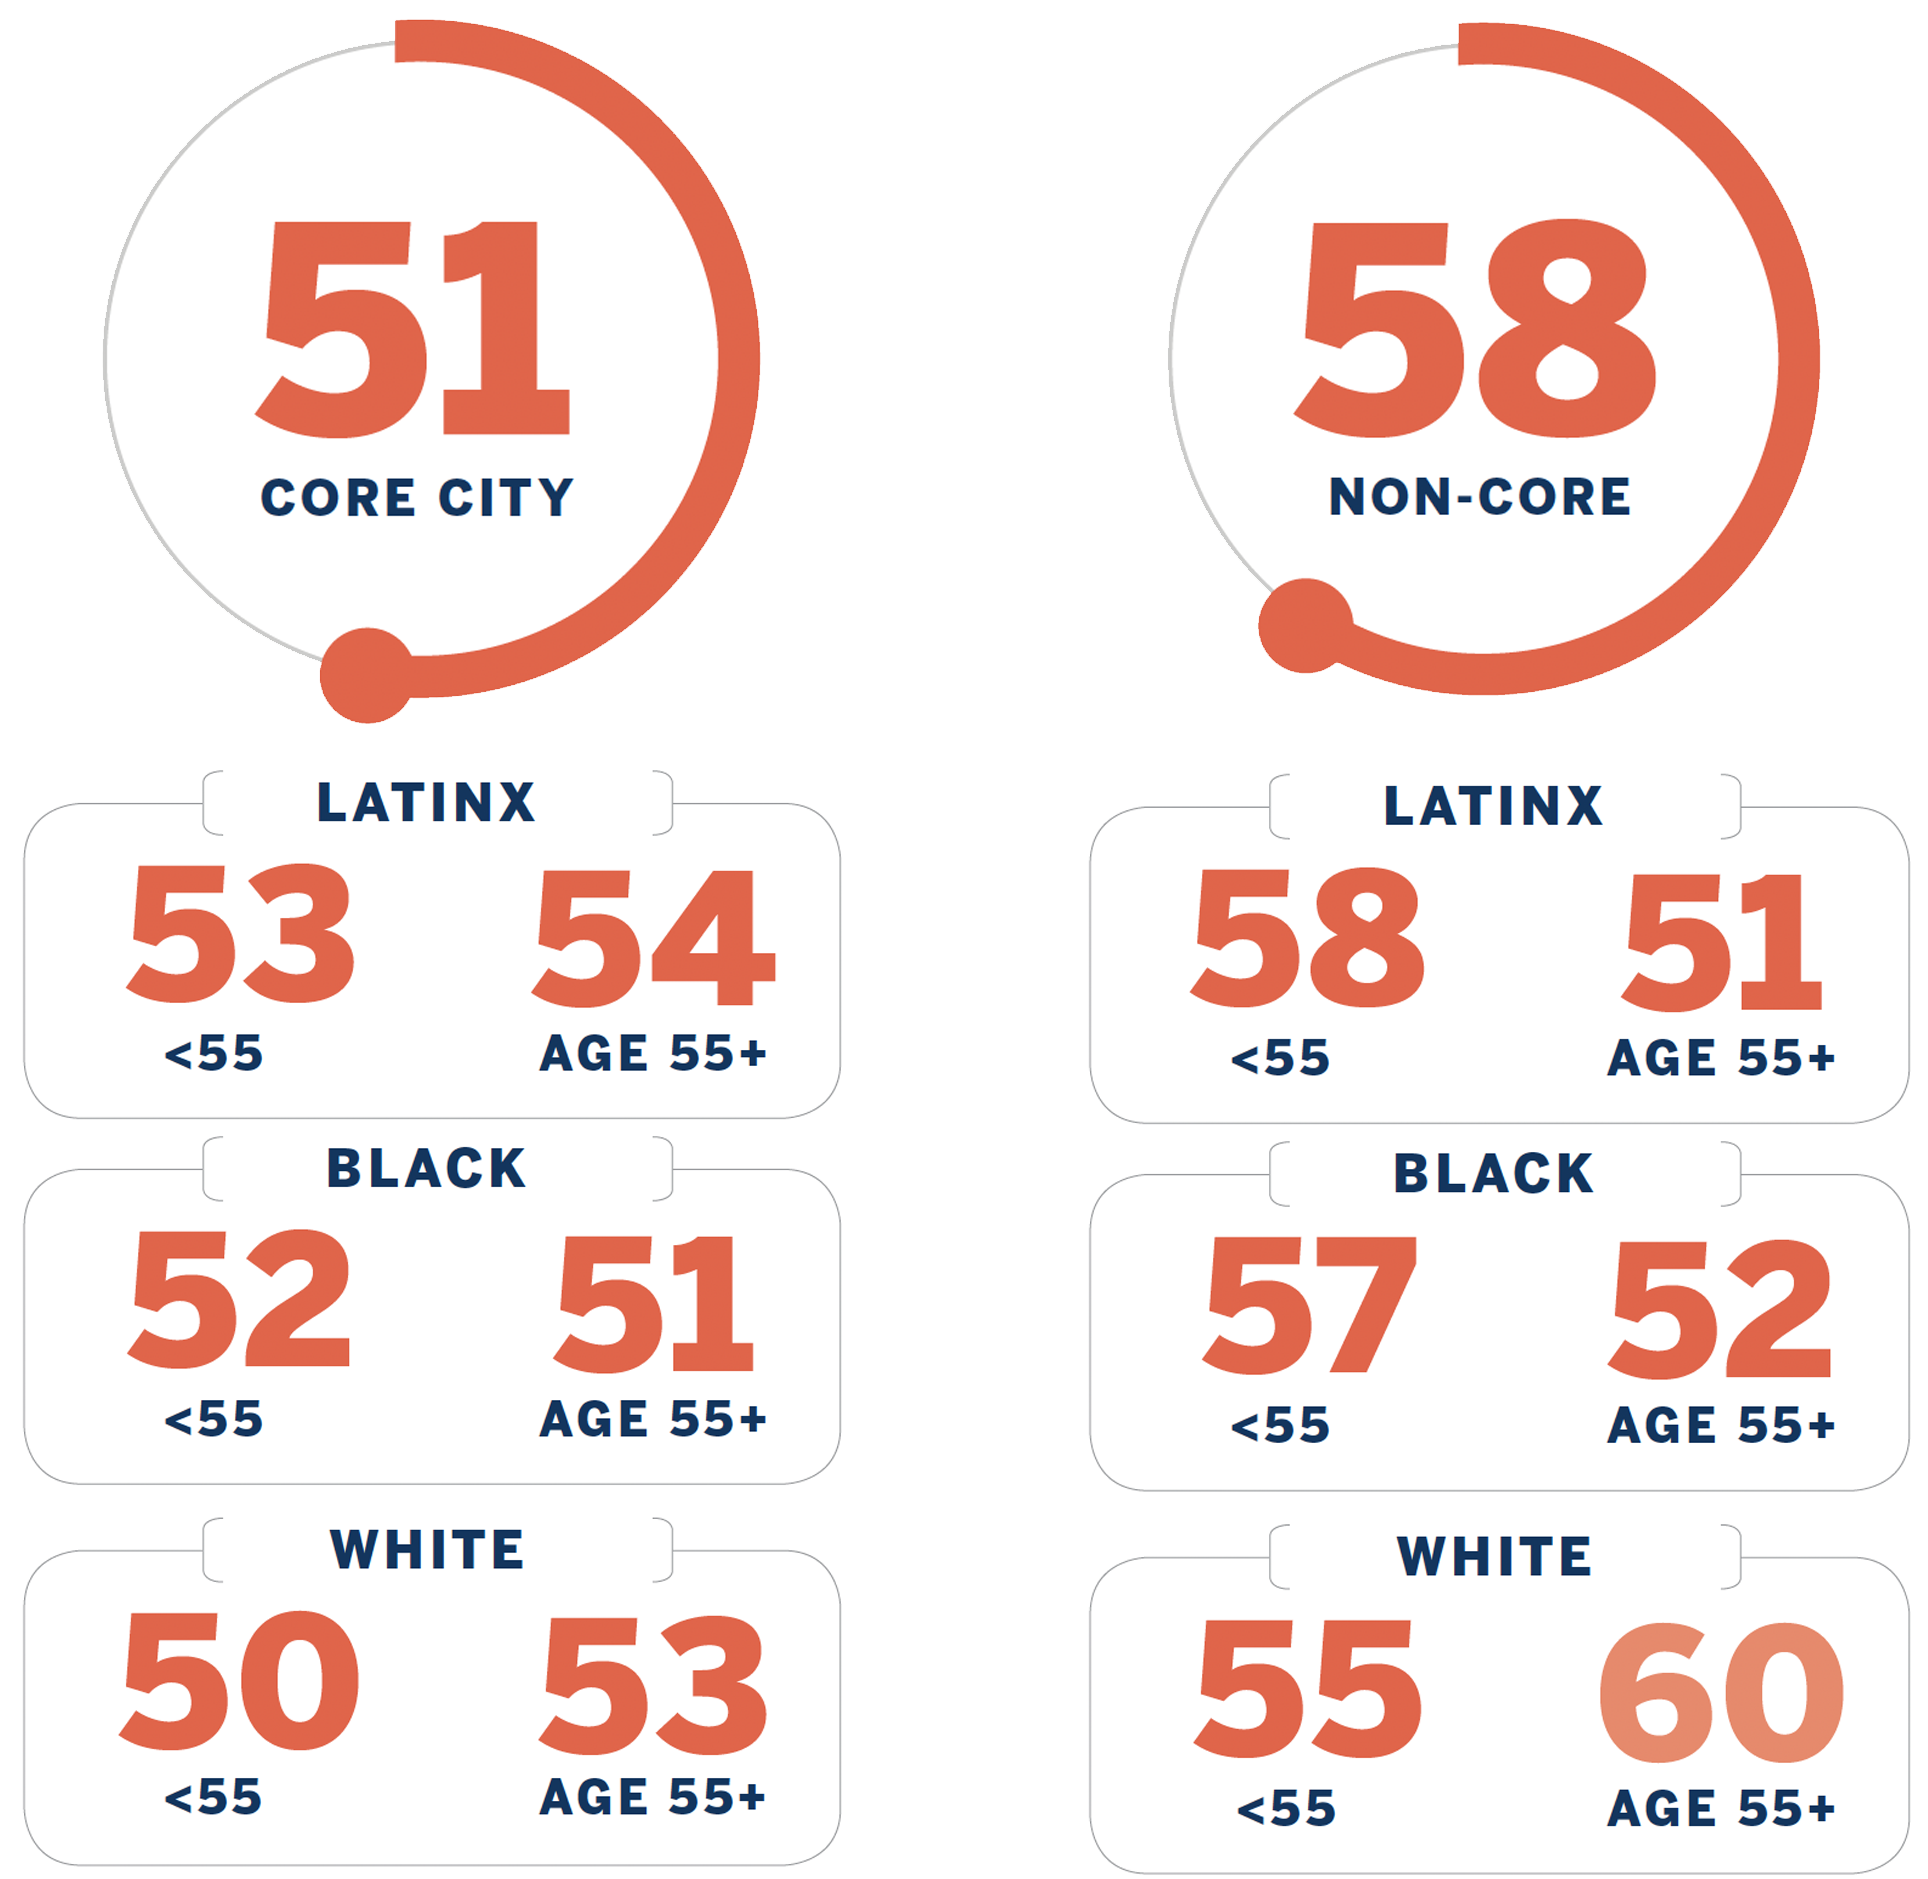 Chart breakdown: Core City: 51 (broken down by Latinx, Black, and White ages less than and over 55) Non-Core: 58 (broken down by Latinx, Black, and White ages less than and over 55)